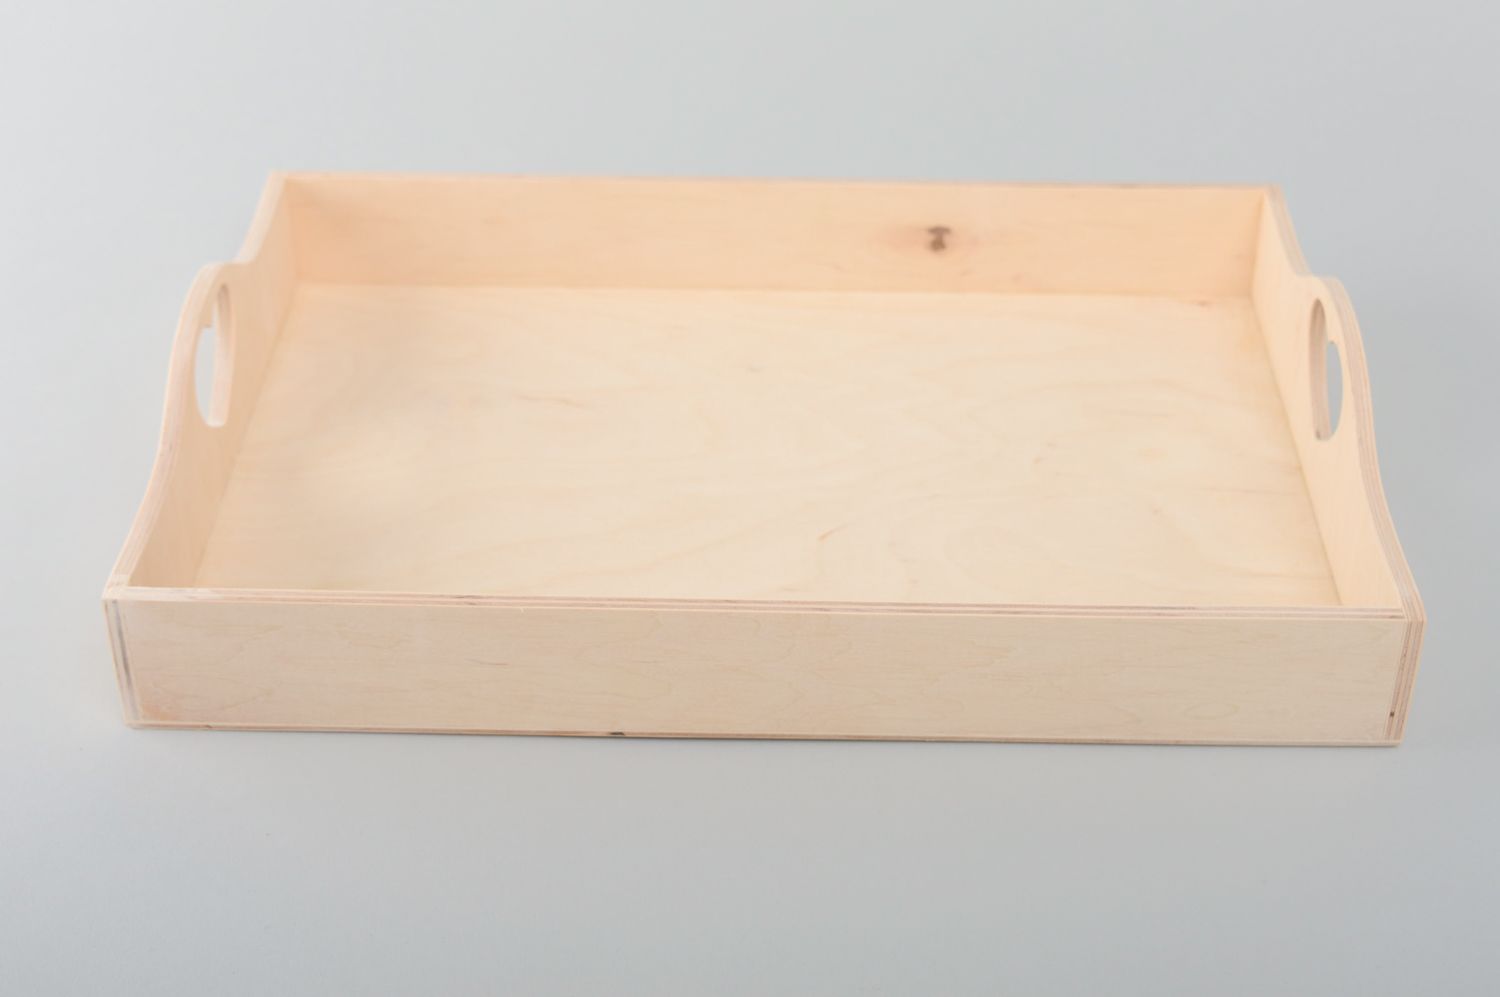 Plywood craft blank for decoupage or painting tray photo 2